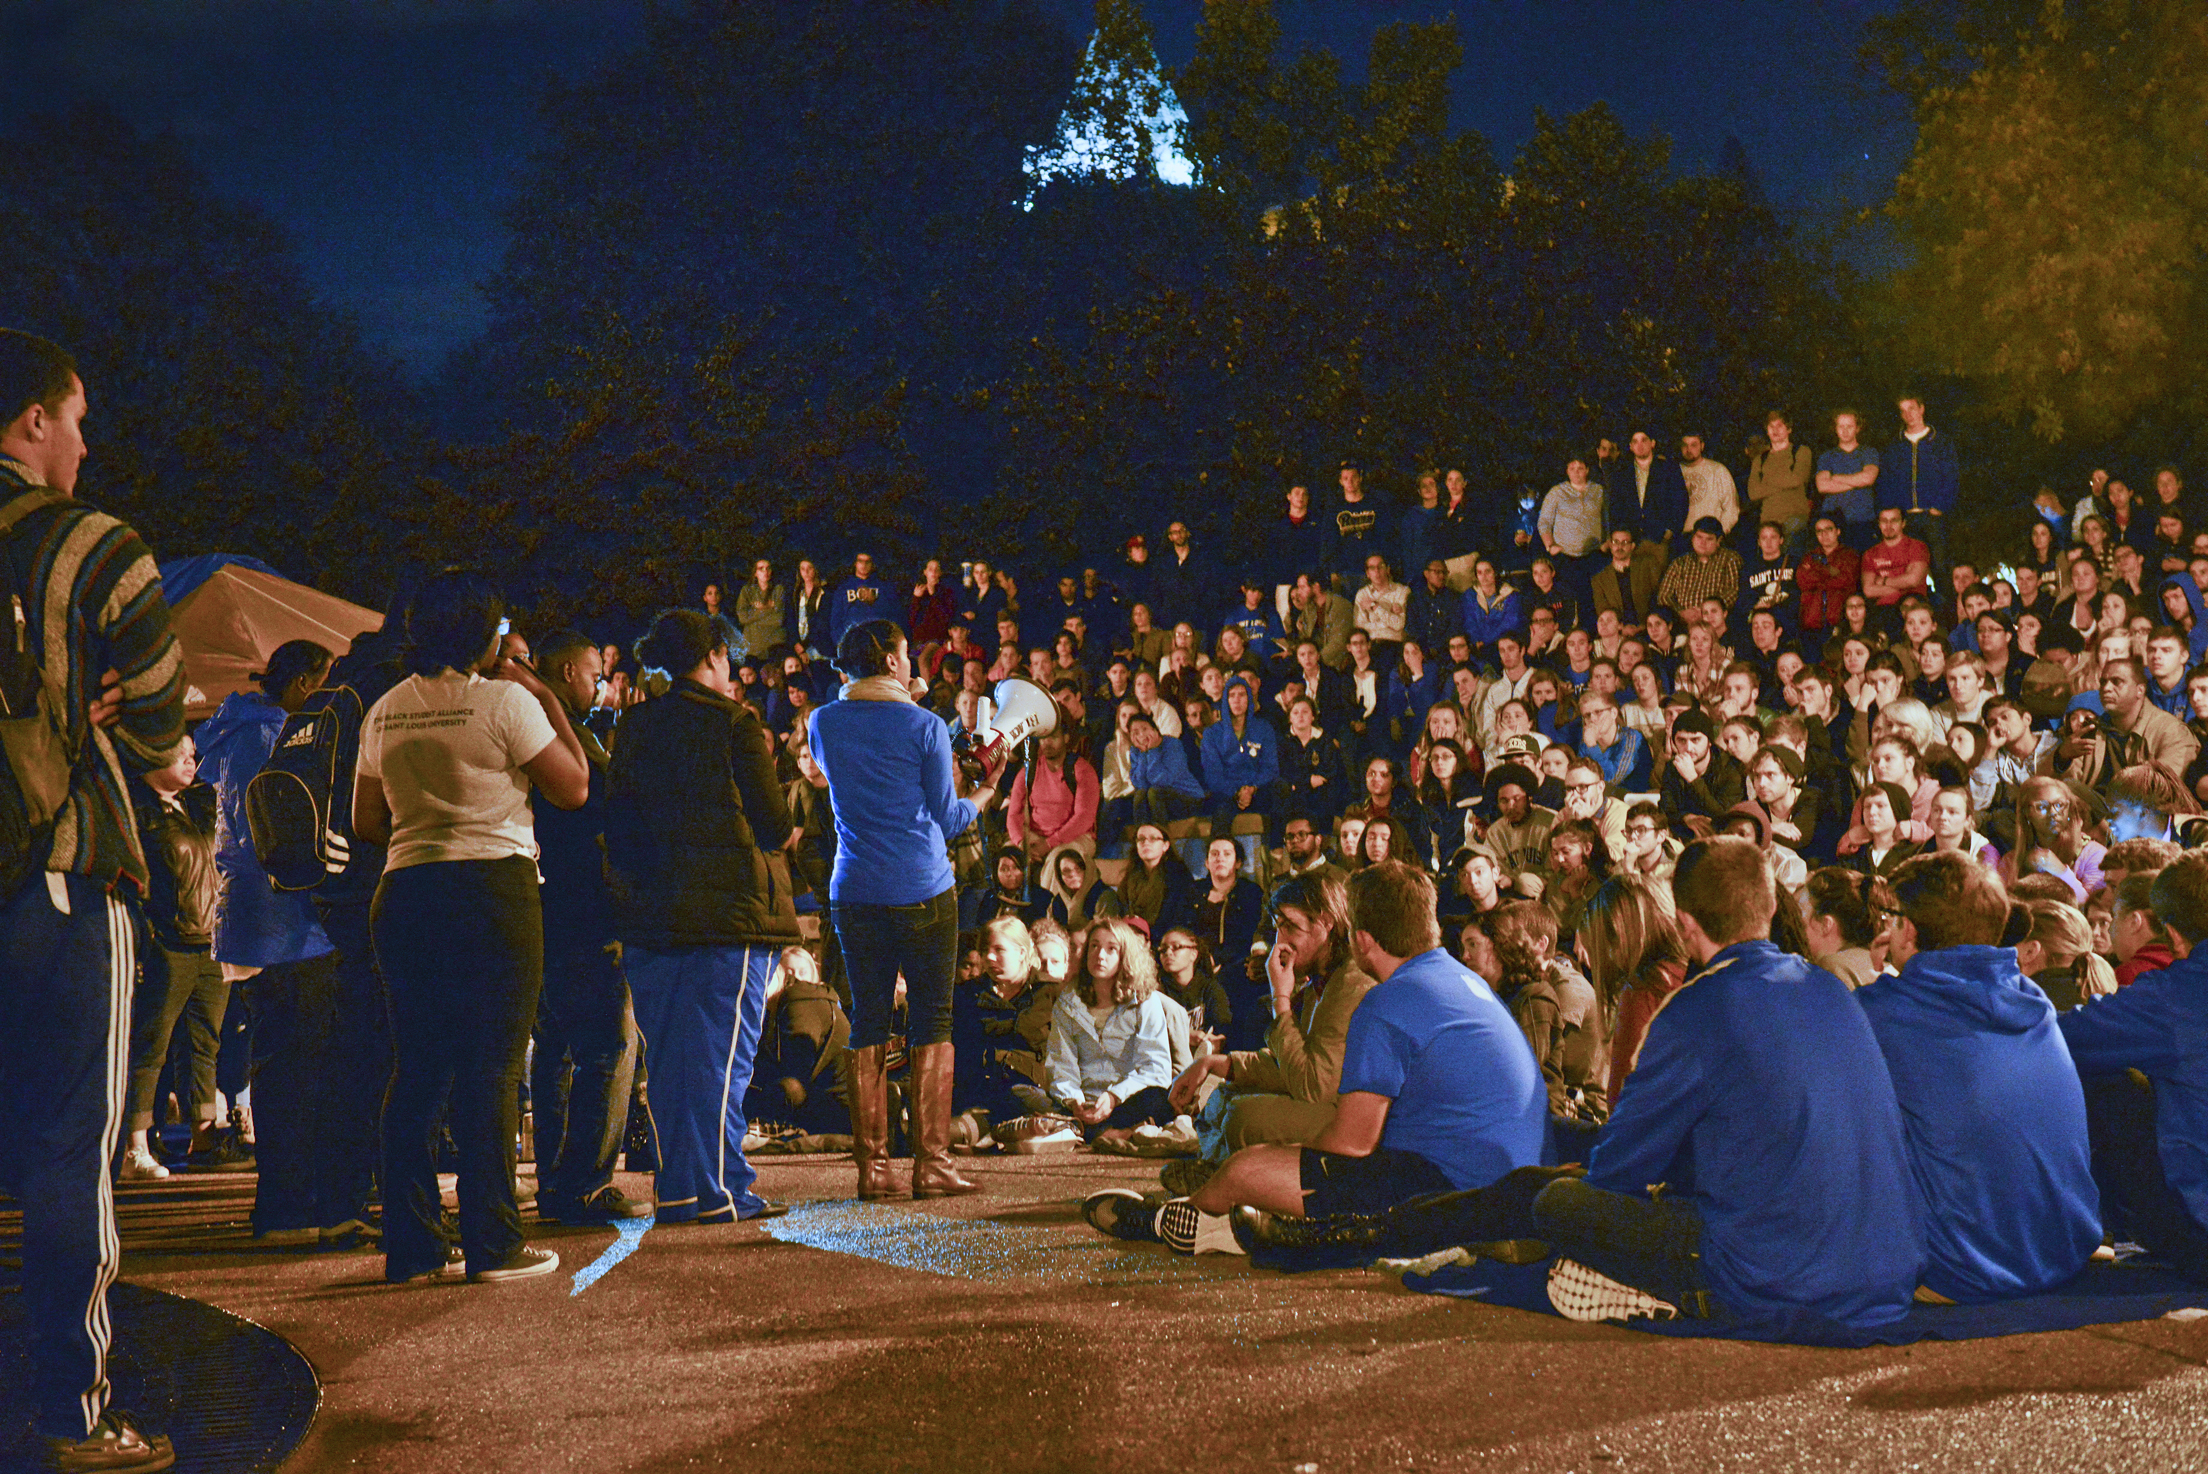 Students crowd around the clock tower plaza while listening to a speaker on a microphone